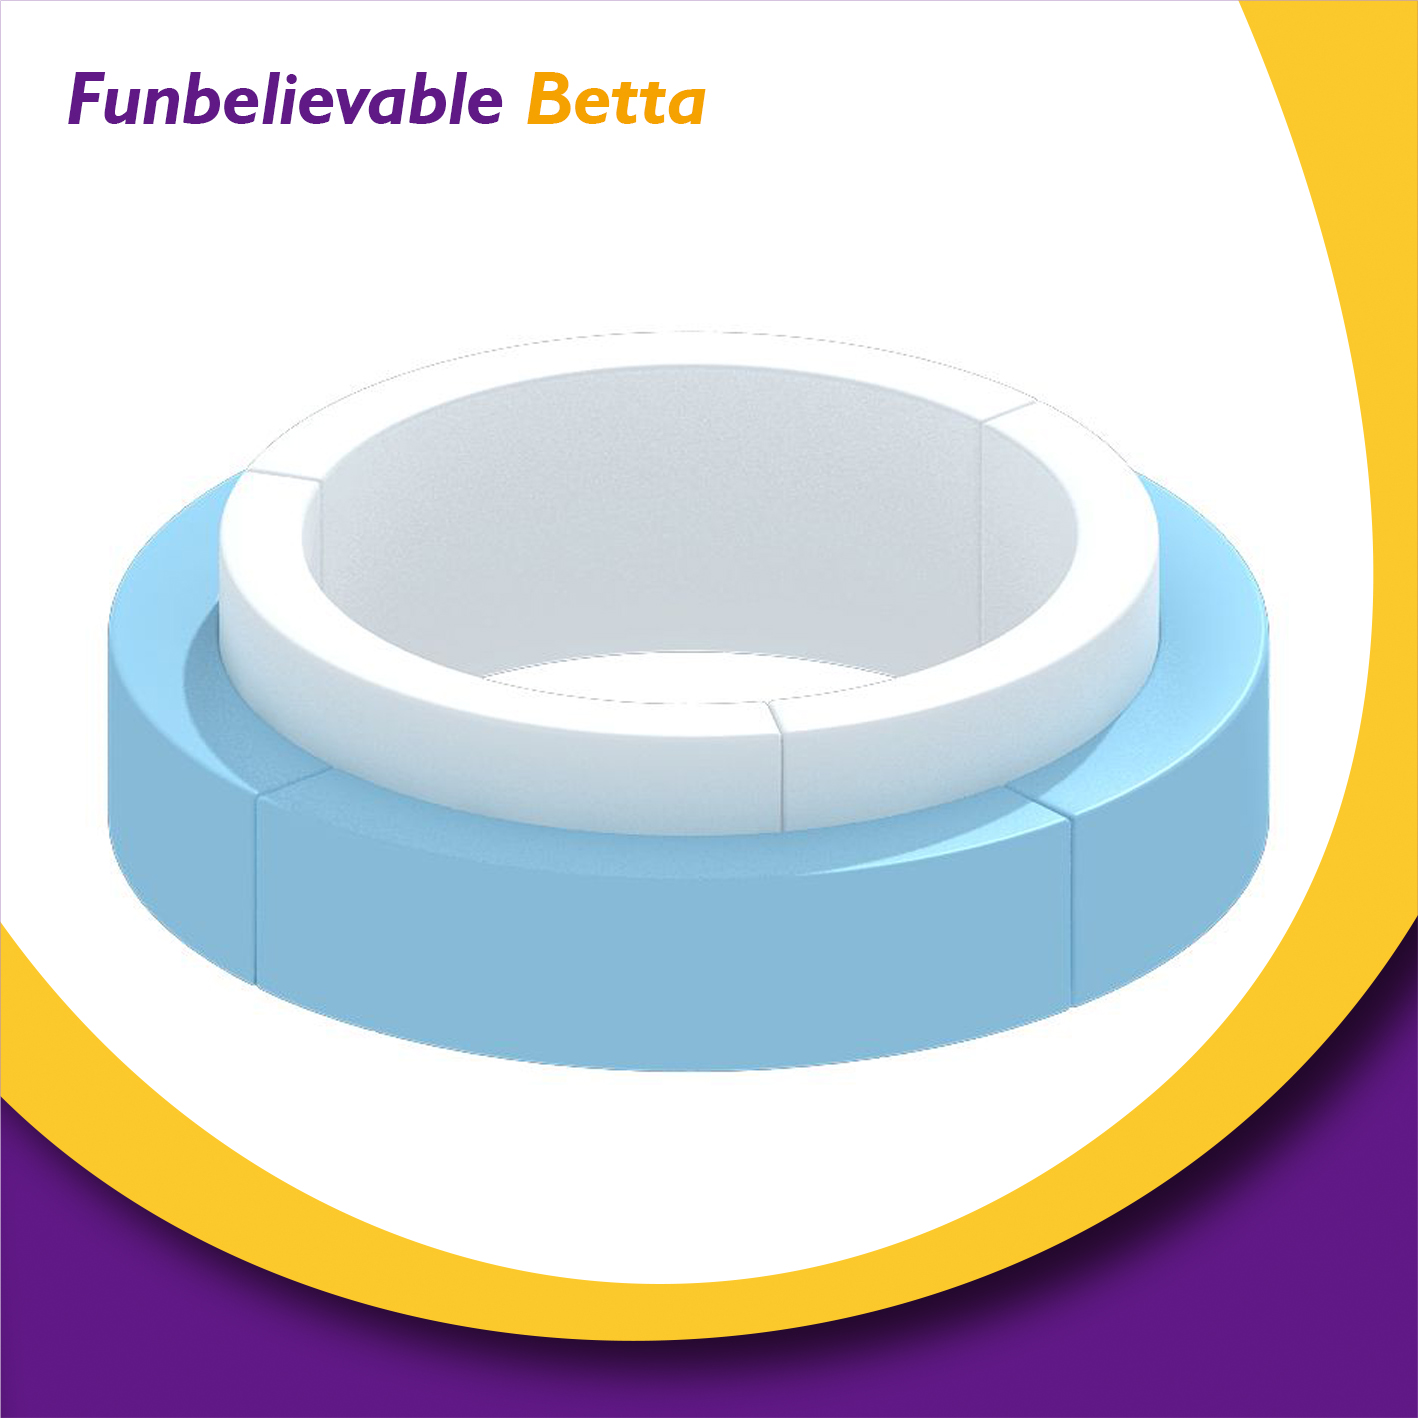 Bettaplay party rental soft play birthday party double circle round ball pit